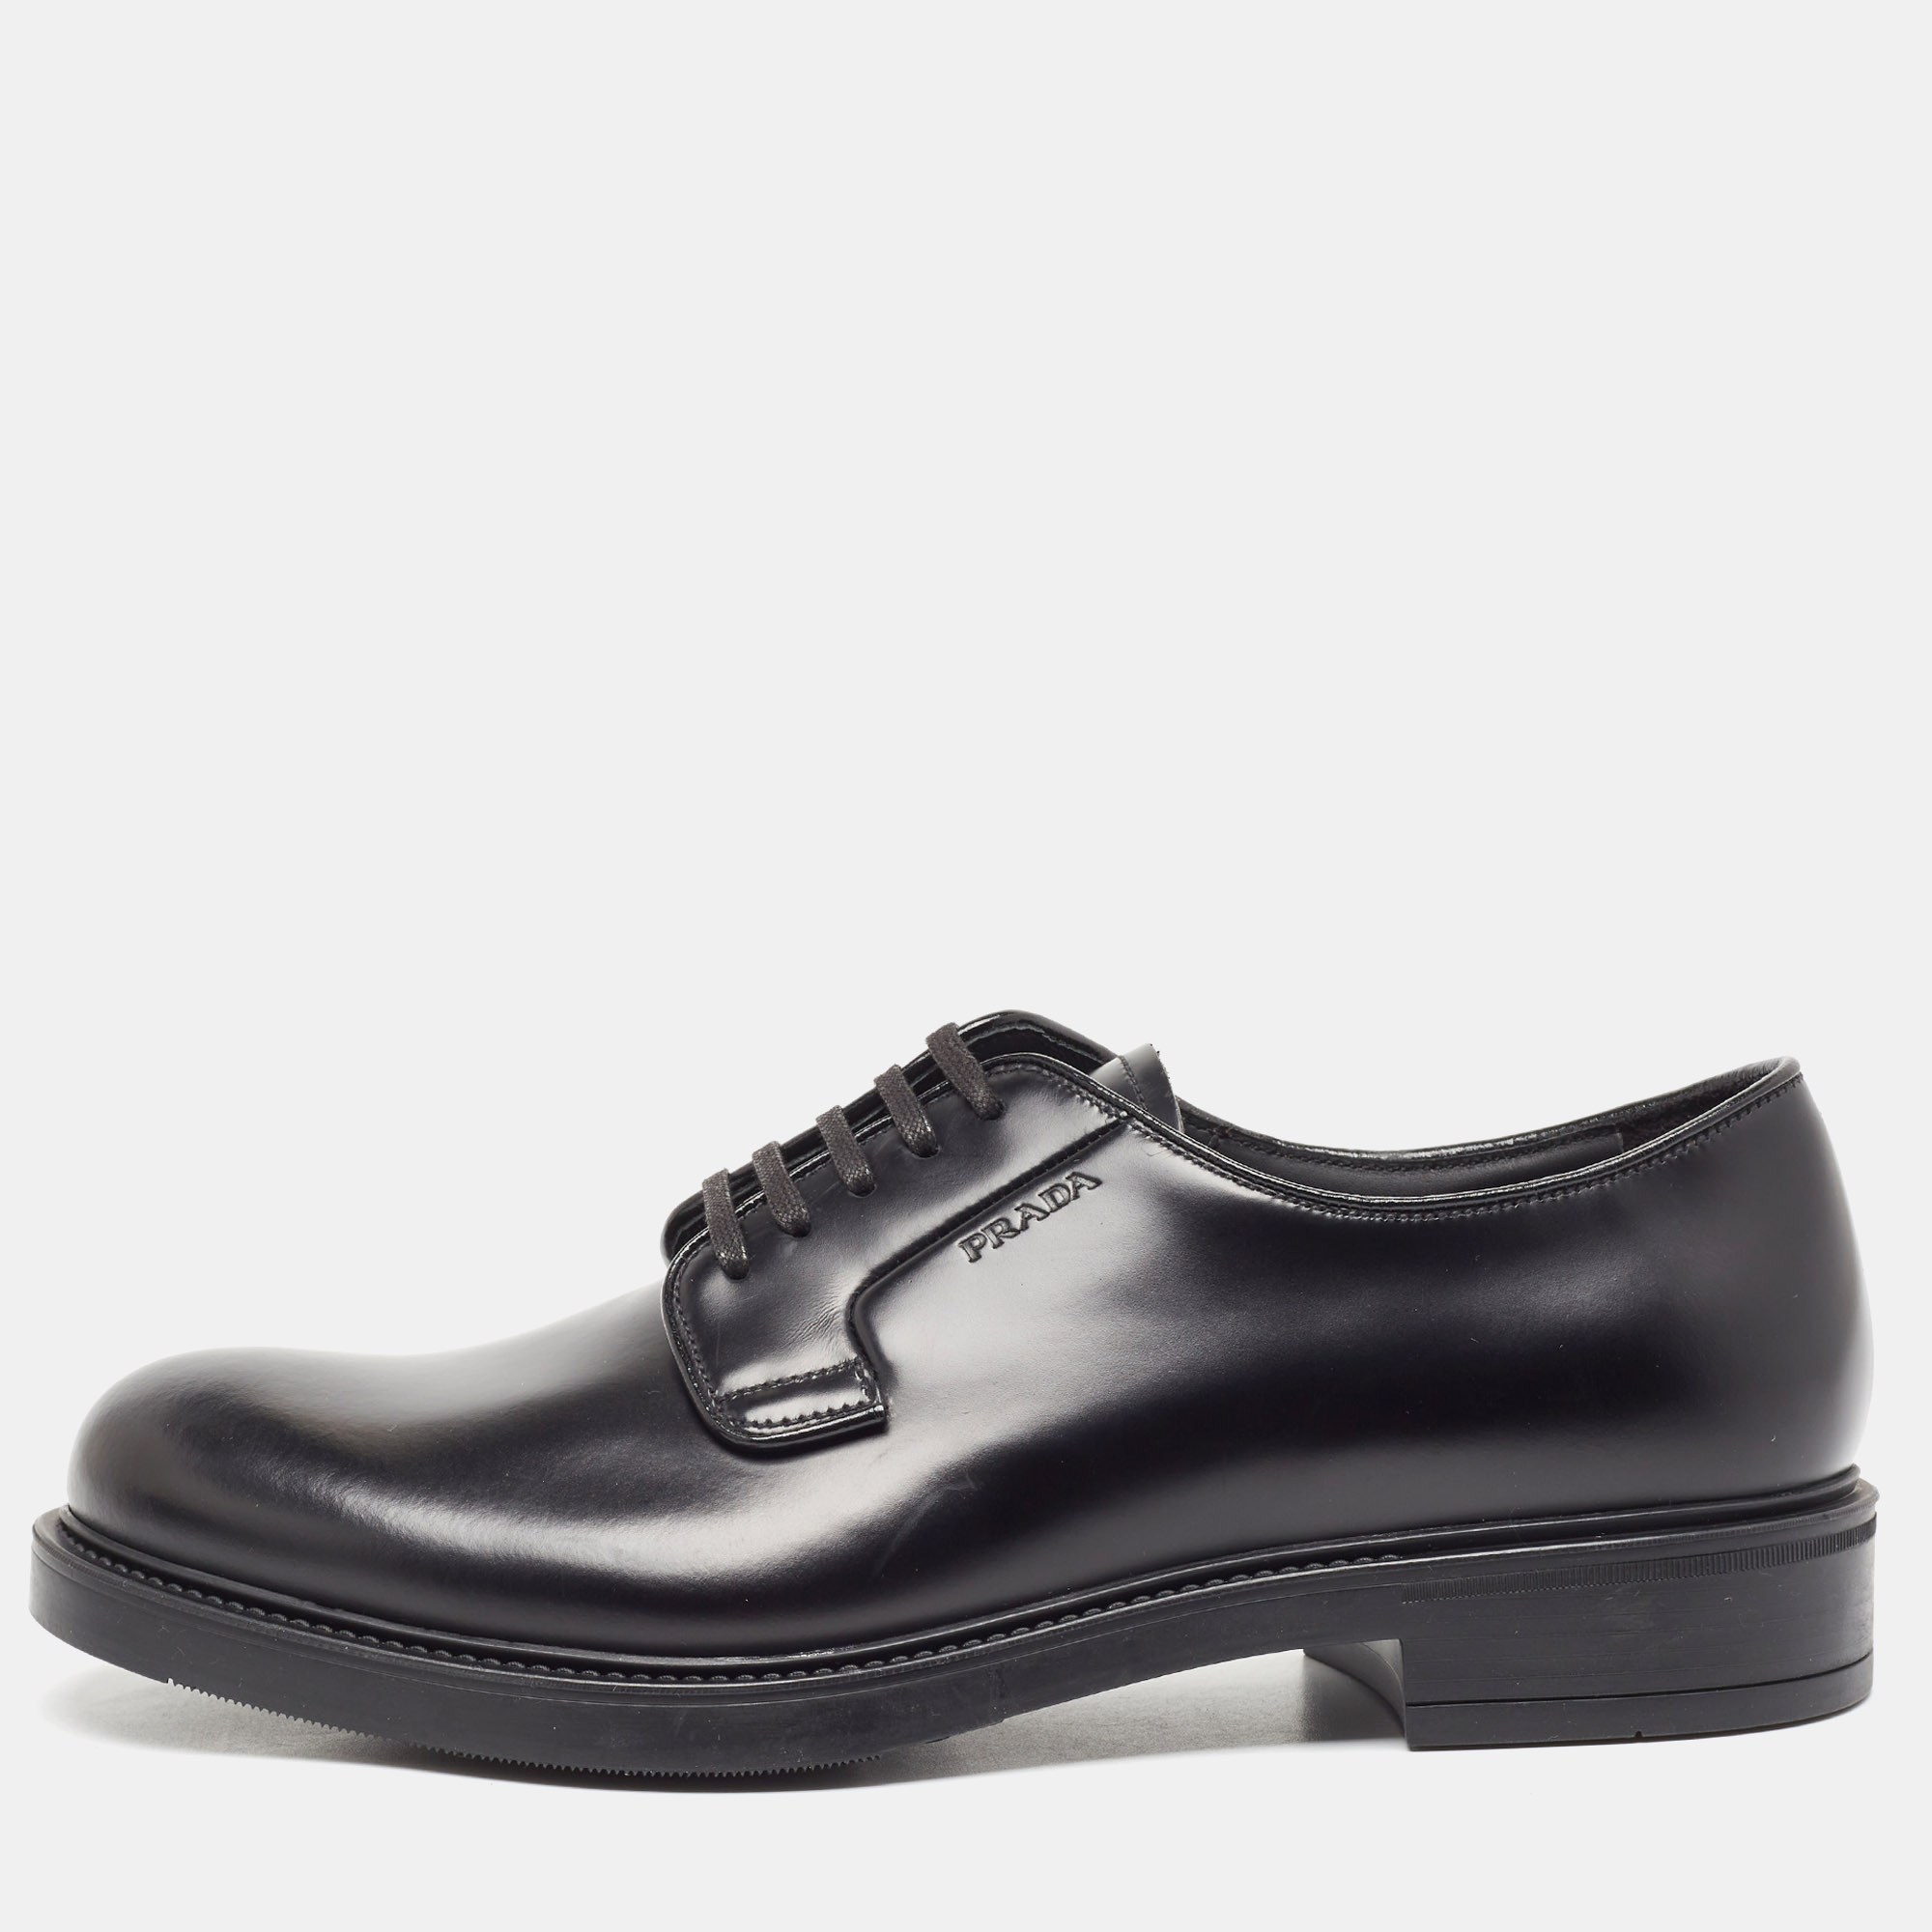 Pre-owned Prada Black Leather Lace Up Oxfords Size 40